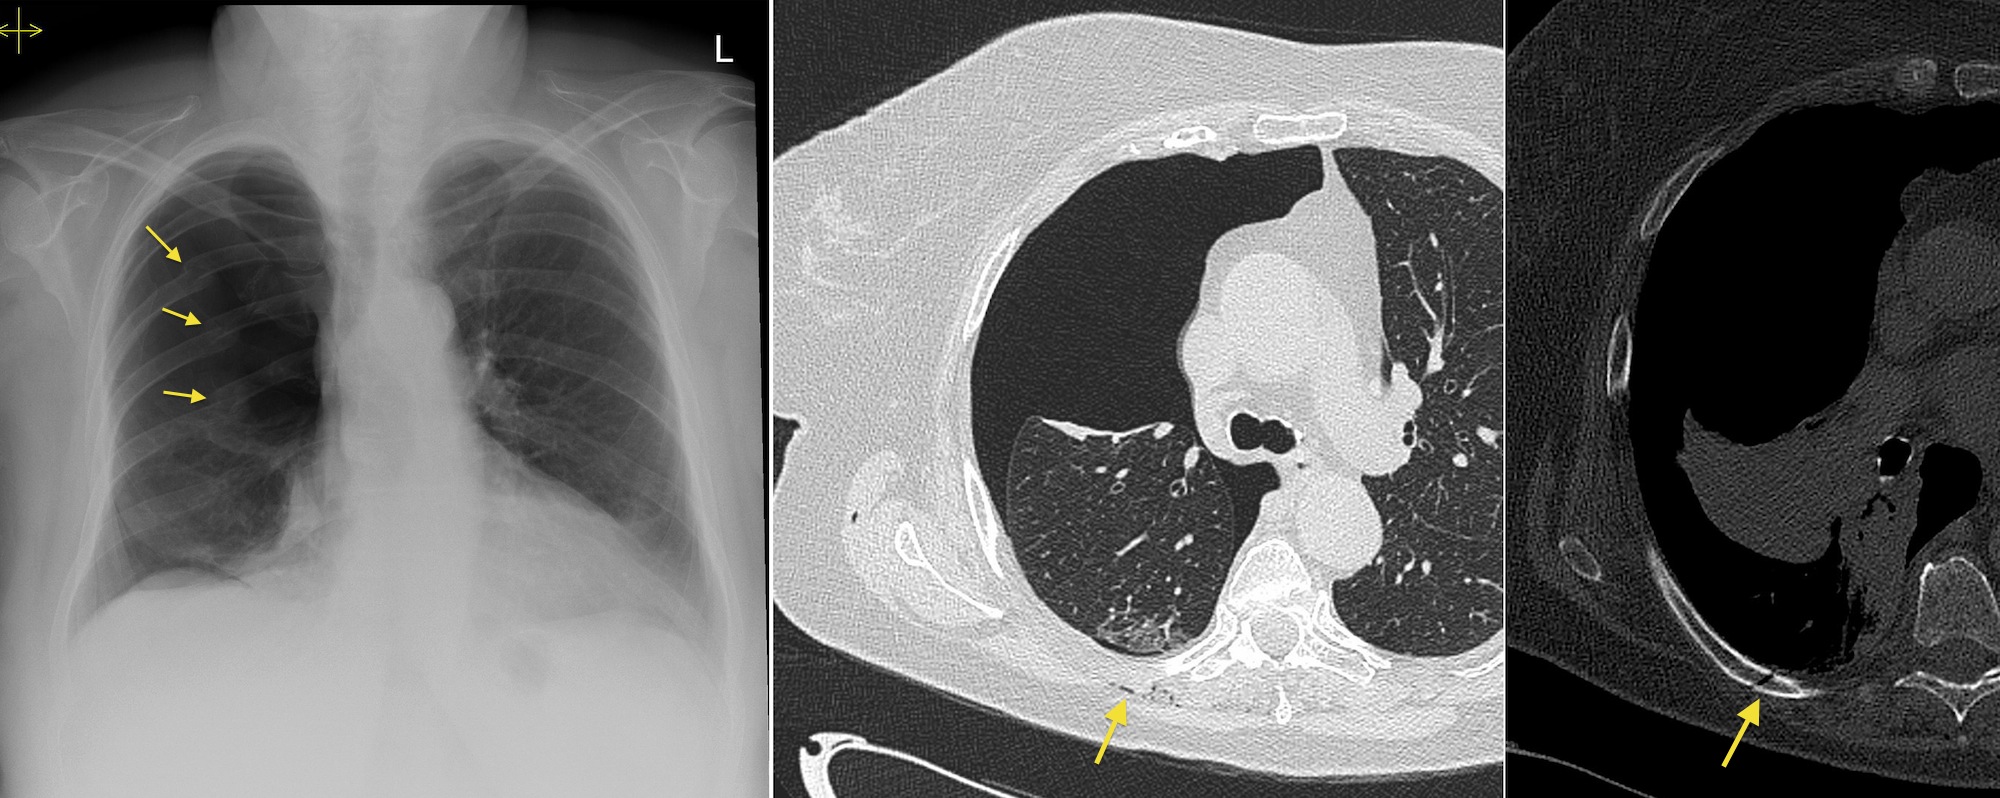 Pneumothorax And Rib Fractures Cxr And Ct Radiology At St Vincent